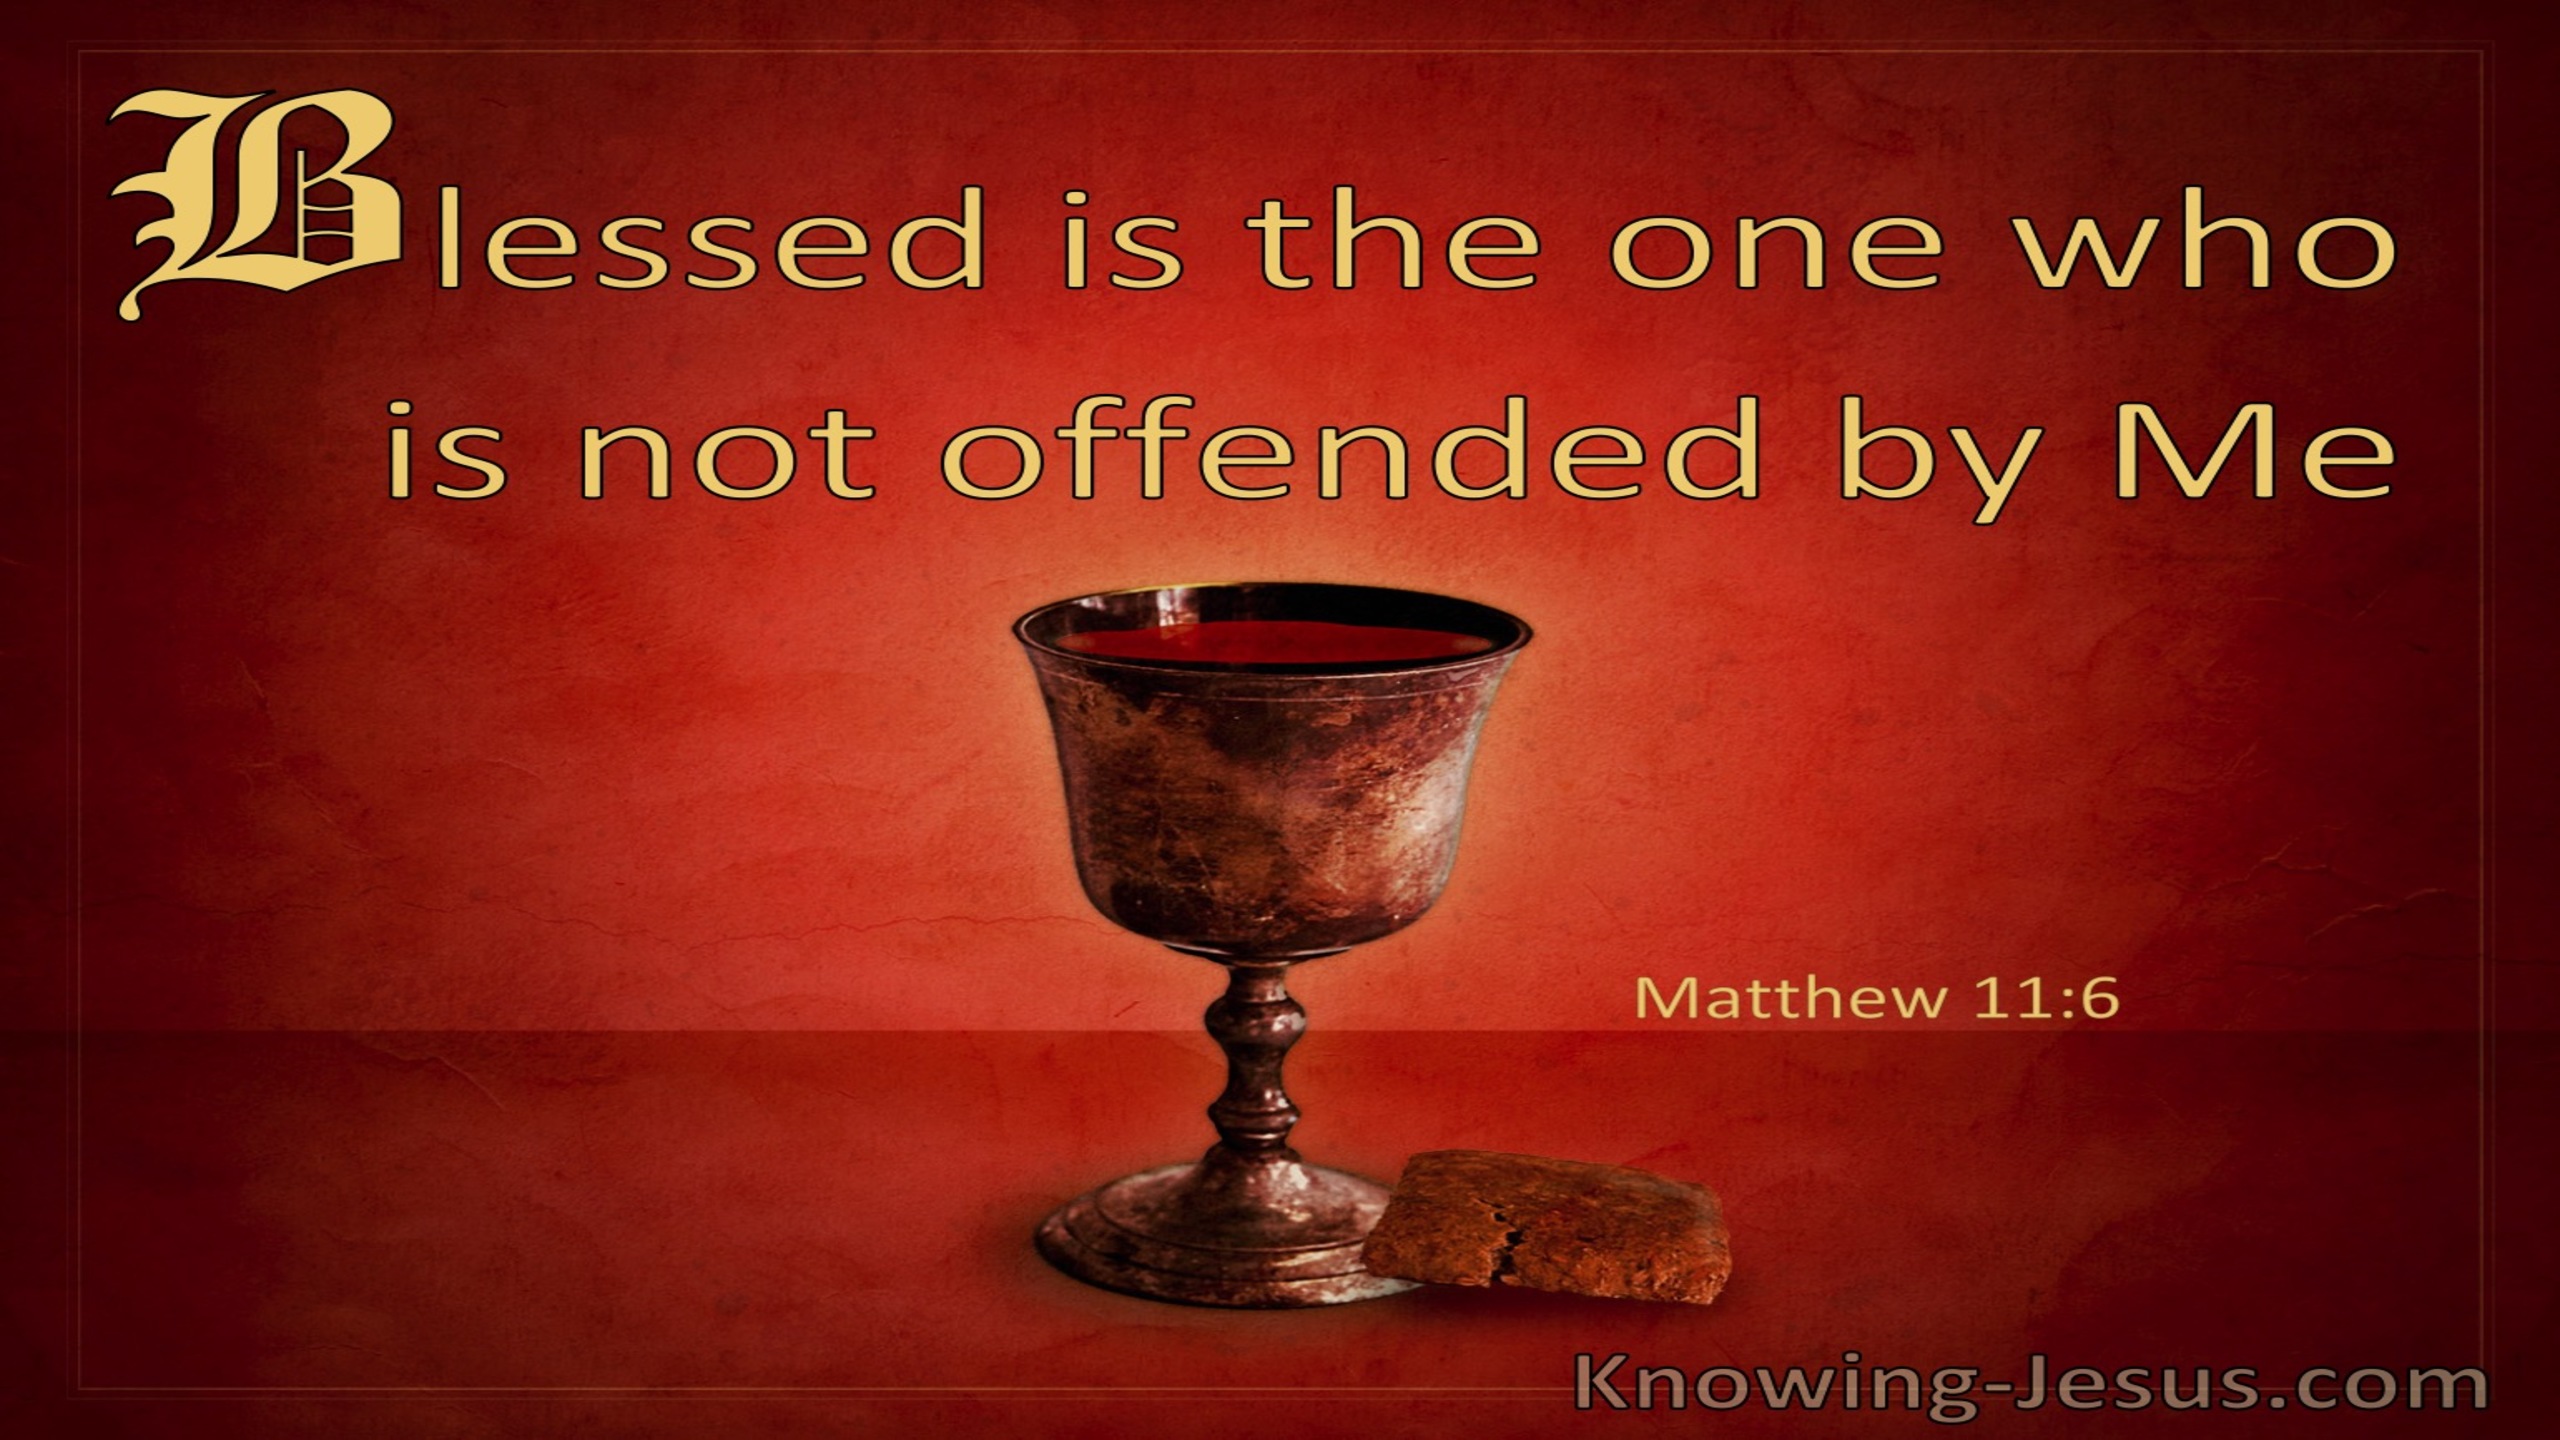 Matthew 11:6 Bless Is The One Who Is Not Offended By Me (windows)04:22